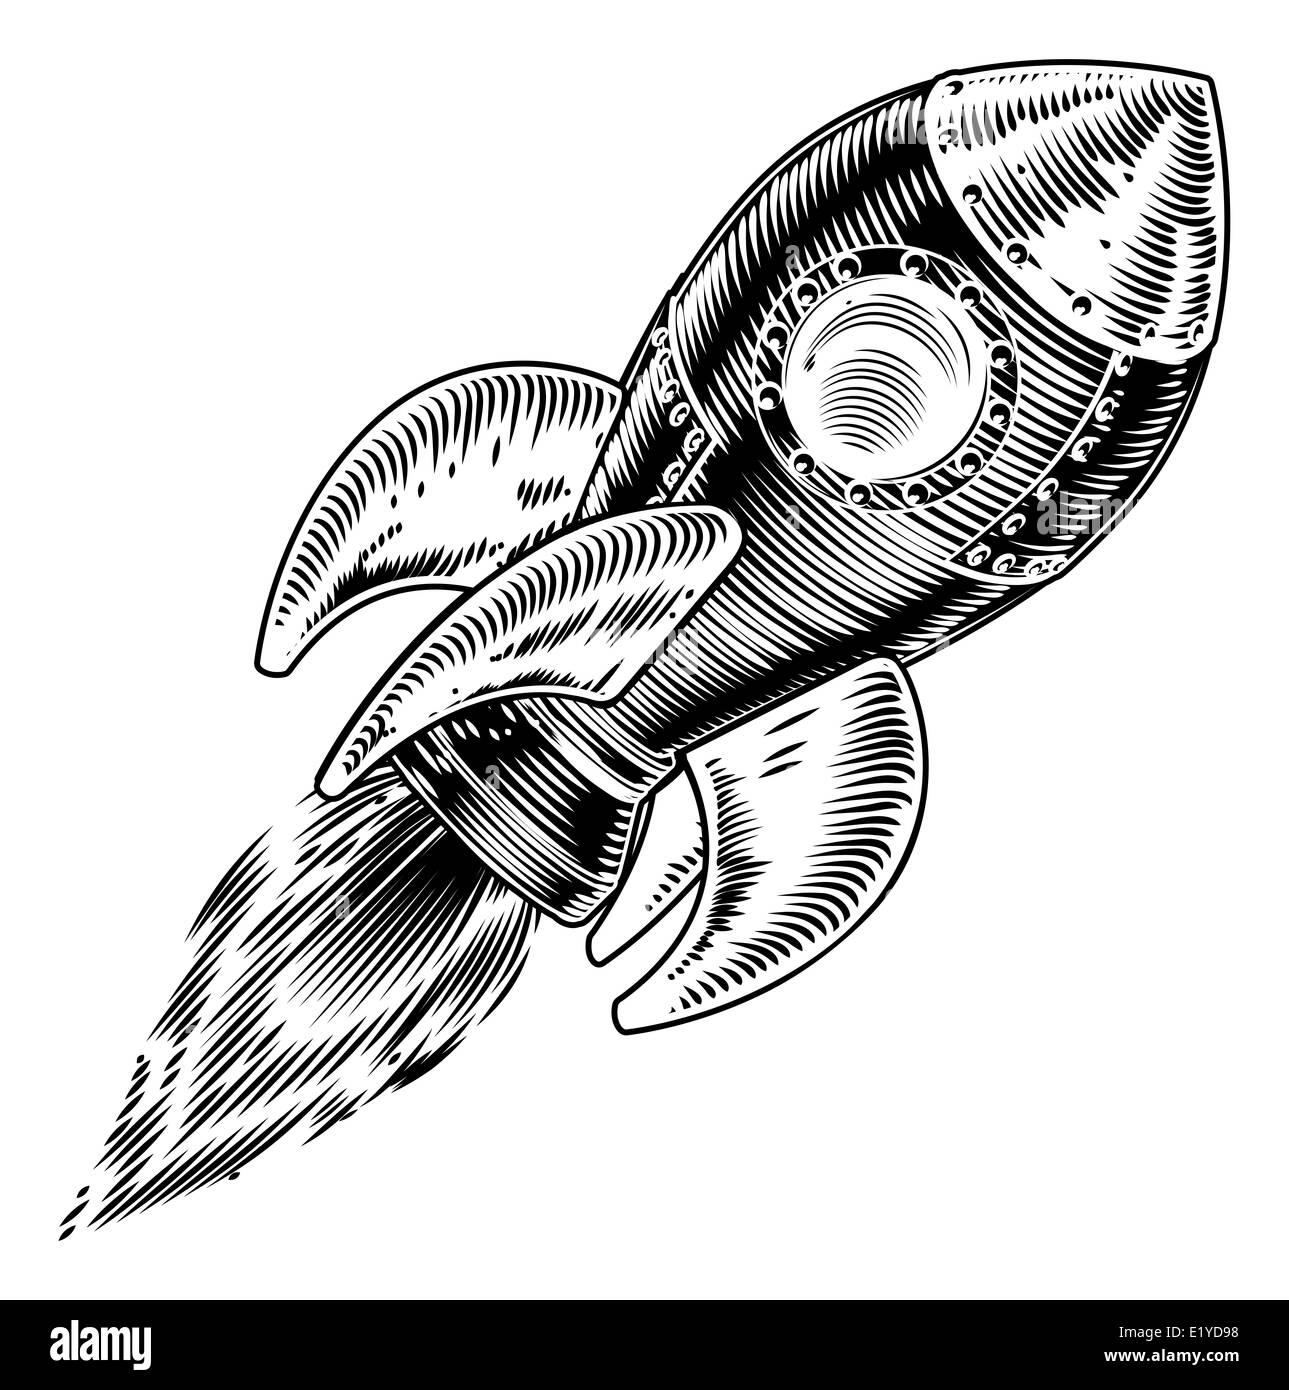 Illustration of a vintage retro style rocket ship or space ship flying through the air Stock Photo